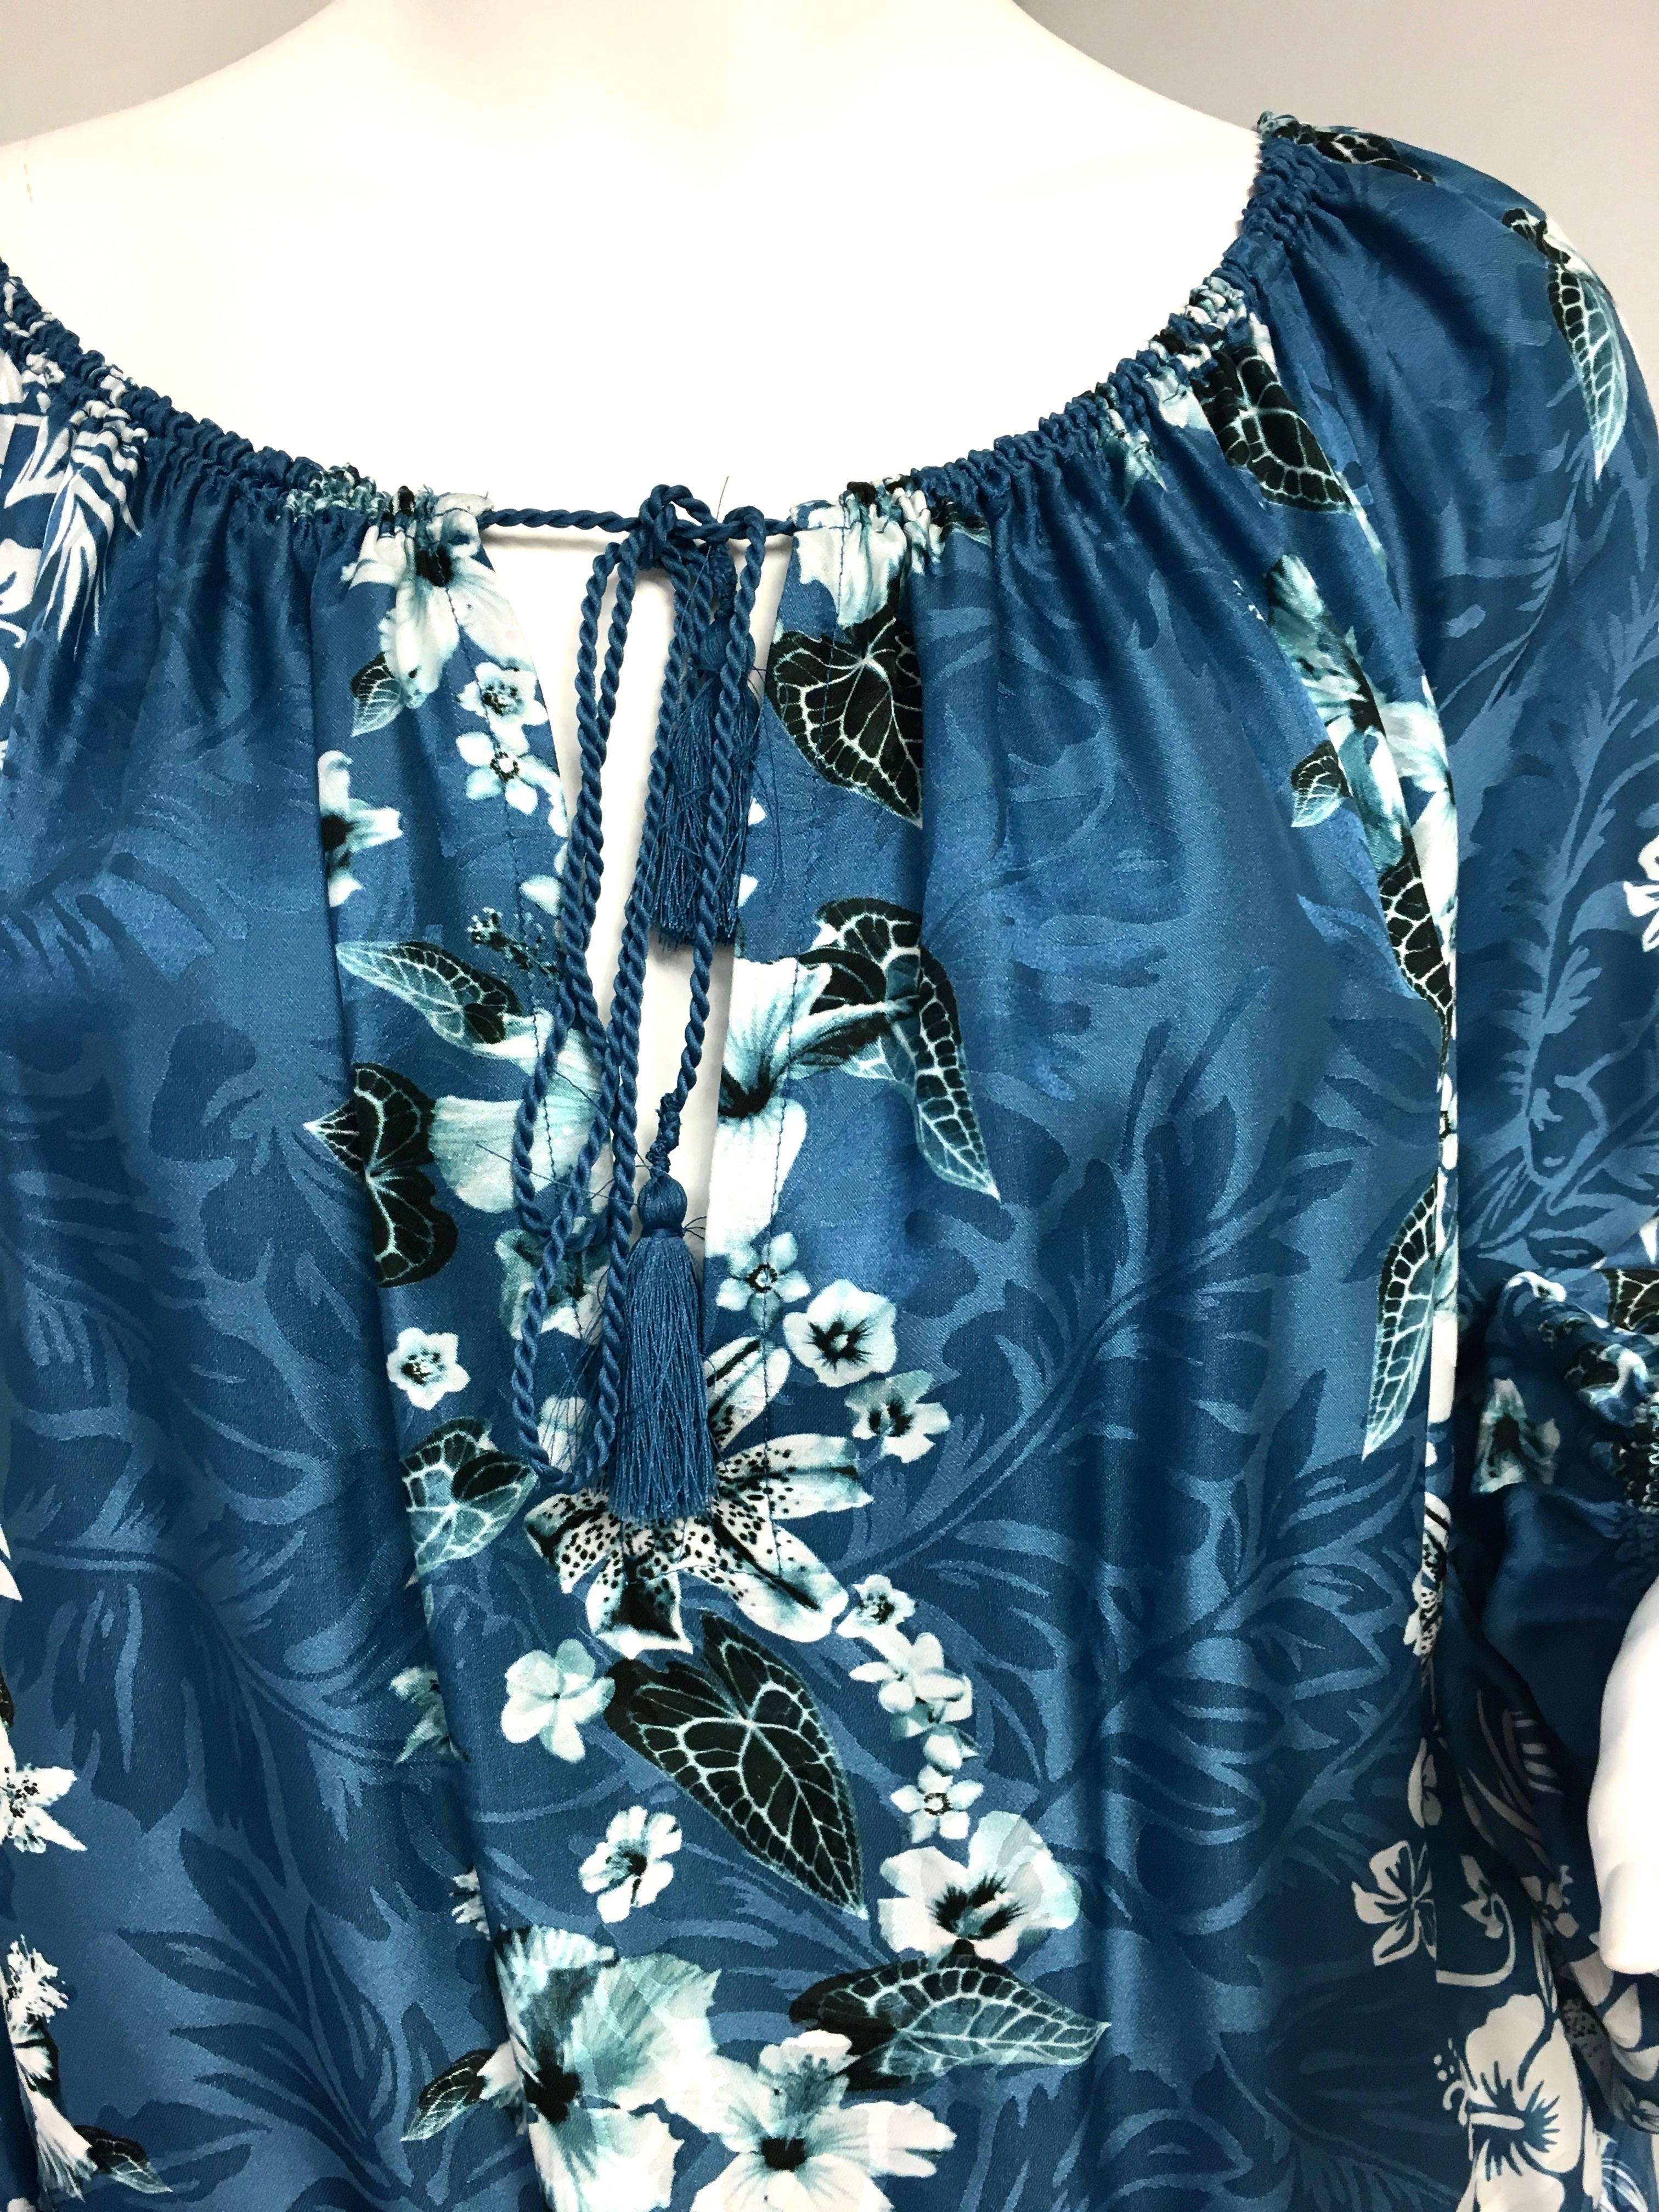 A traditional, tropical Hawaiian print decorates this blouson dress. Long sleeves. Halter neckline with tie closure.  Blouson top. Pullover style. Knee length or a bit above depending upon how much blouson you want. Size 42 ITA / 8 US. Approximate